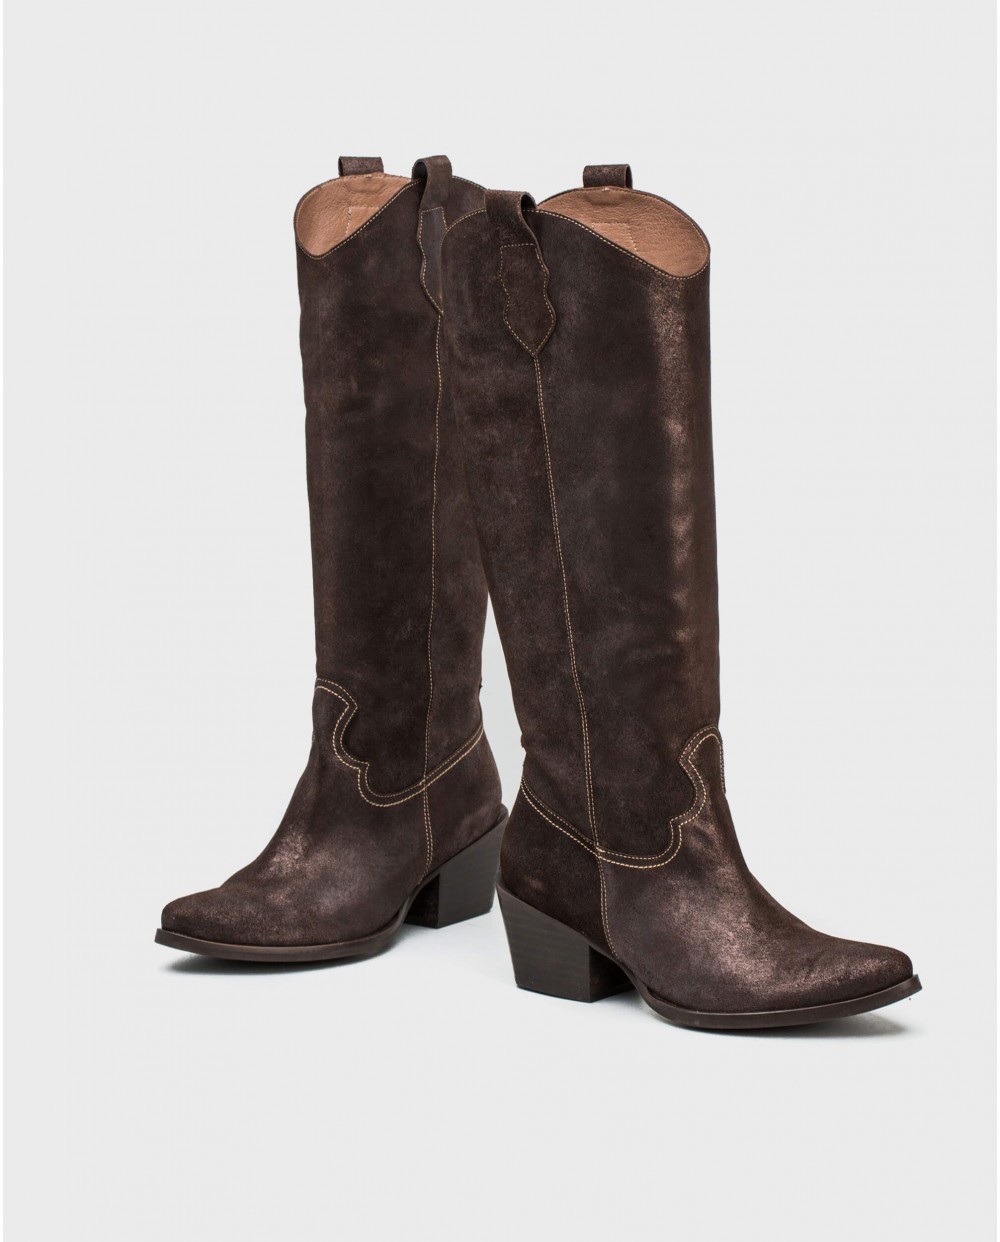 Wonders-Outlet-Metallic leather cowboy boot